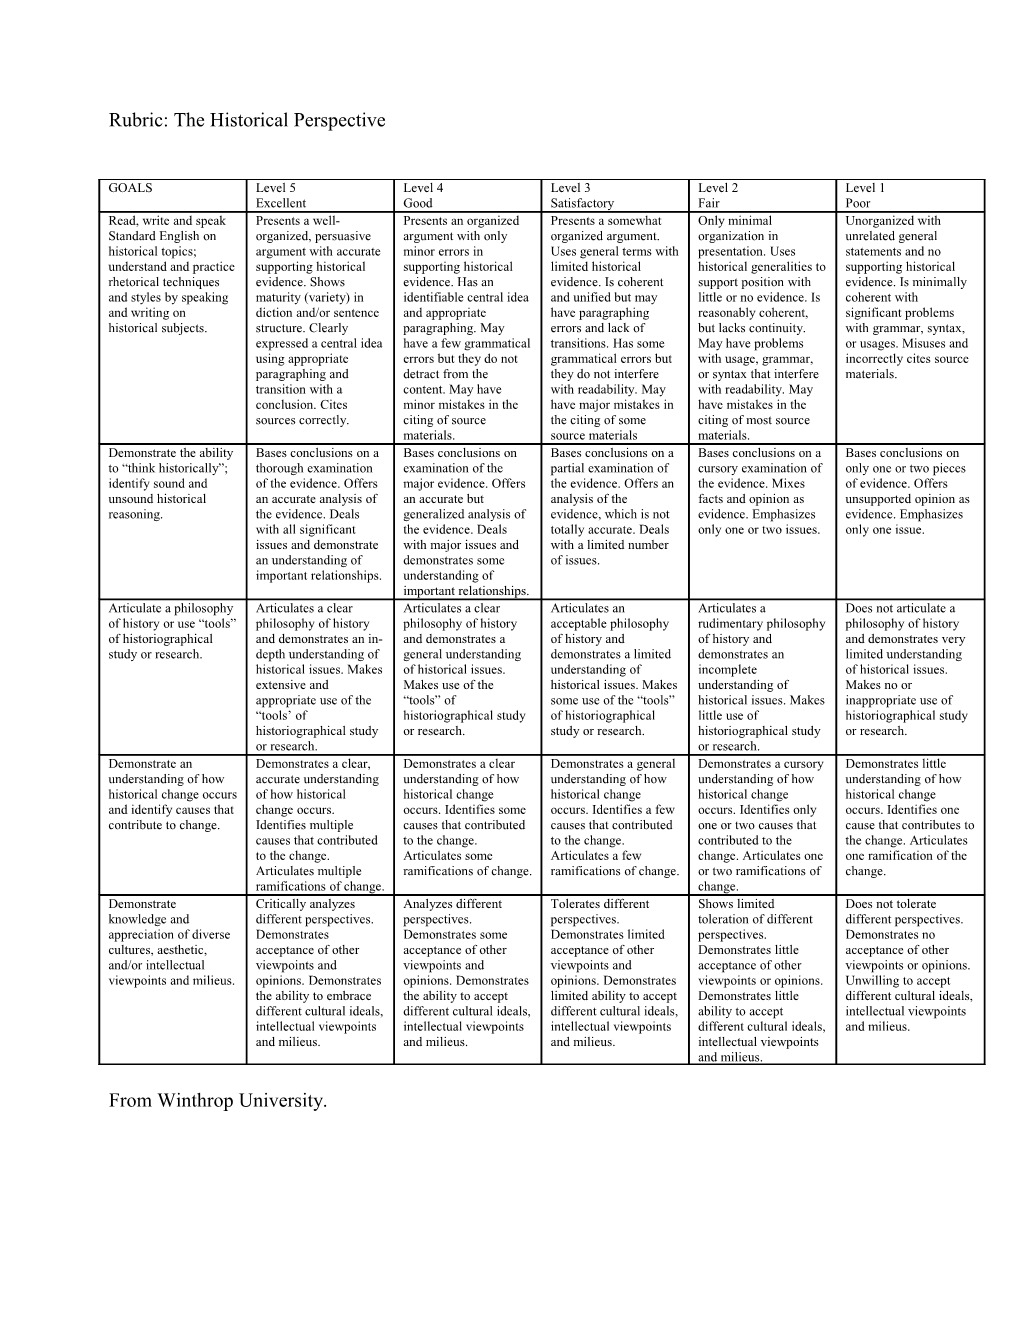 Rubric: the Historical Perspective